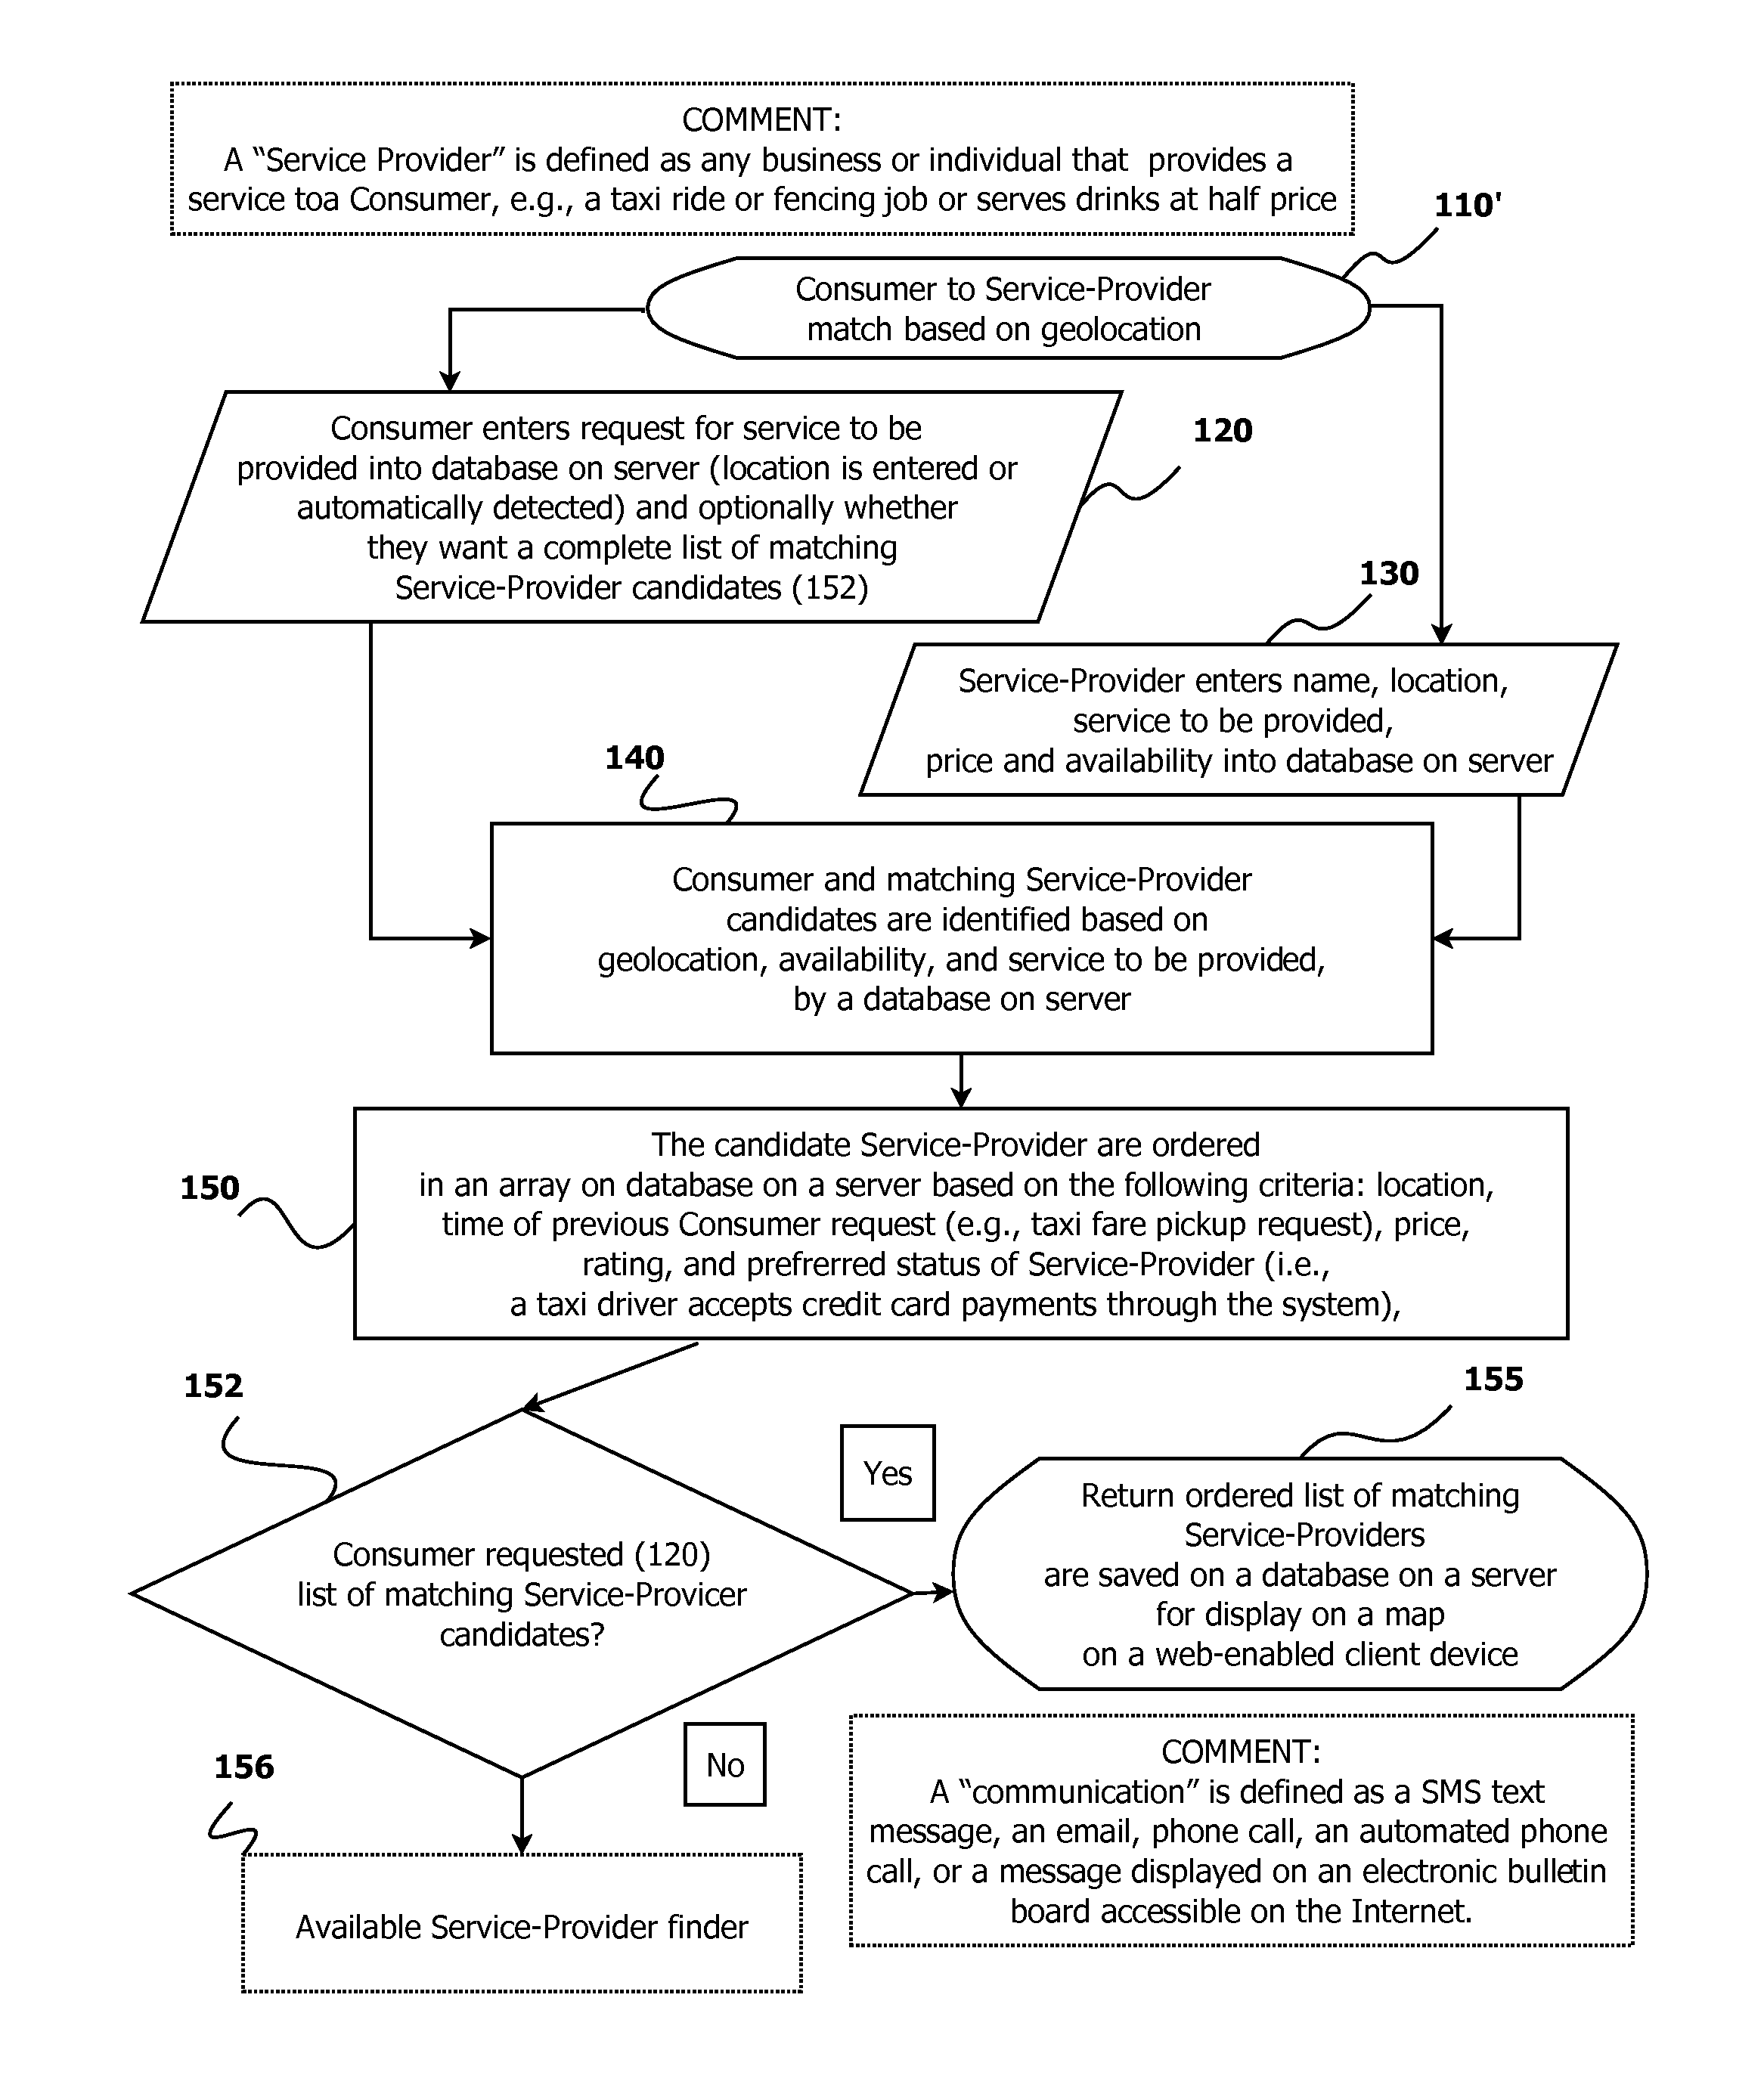 Method and System for the Location-Based Discovery and Validated Payment of a Service Provider